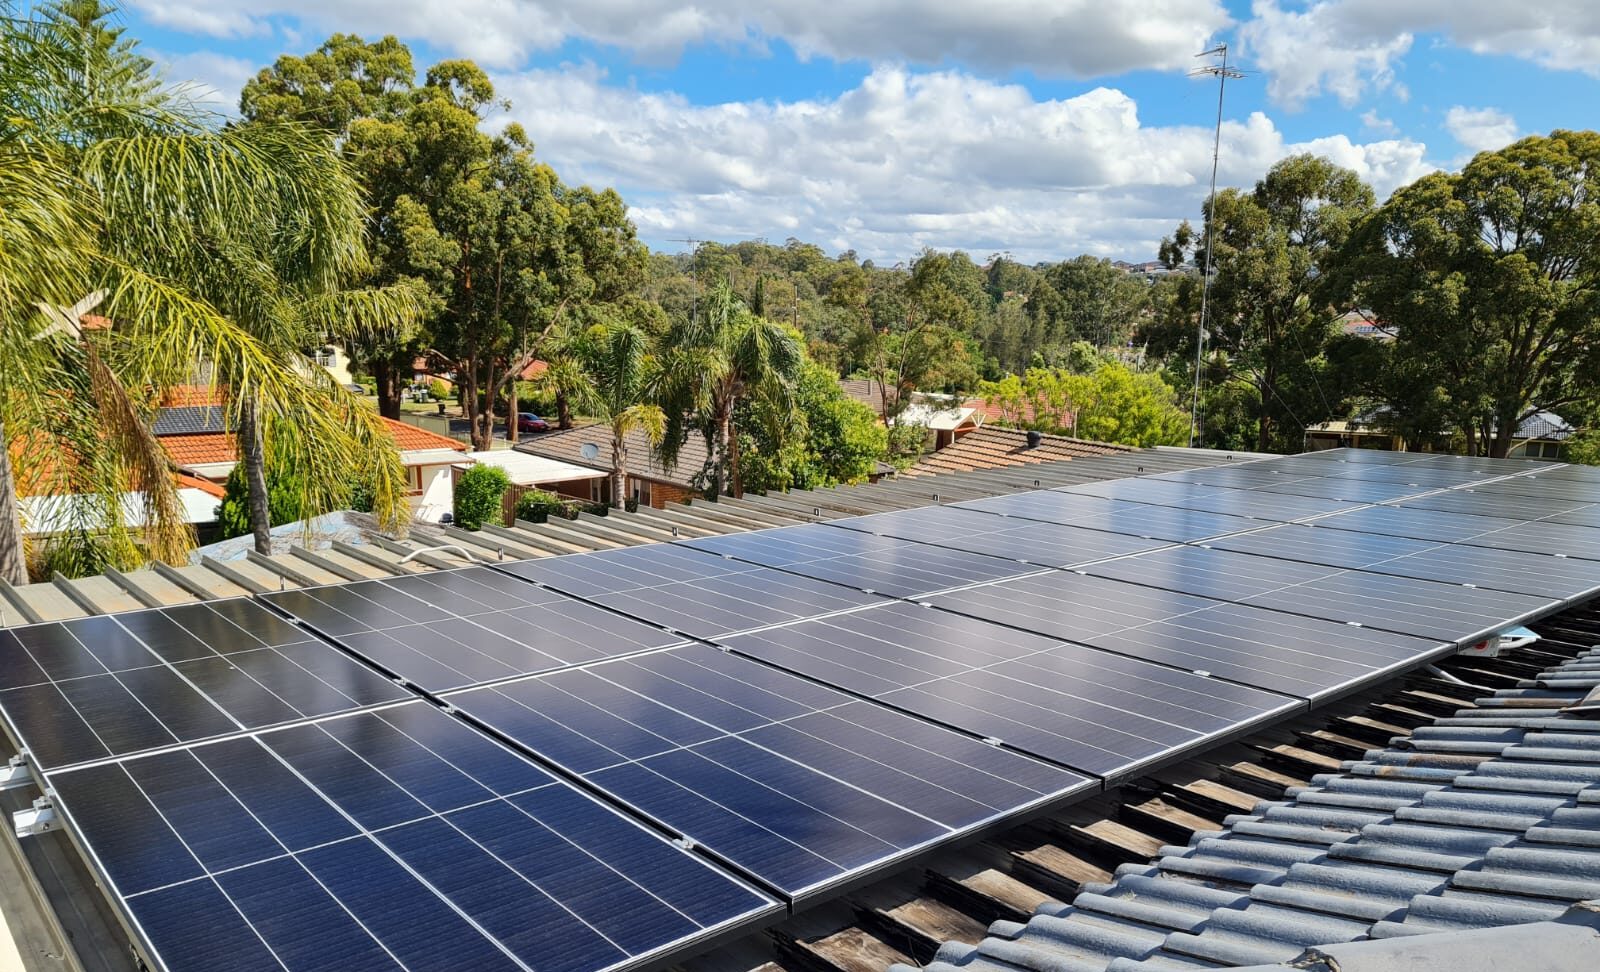 “Why Yello Energy Group is the Best Solar Panel Installer in Sydney”